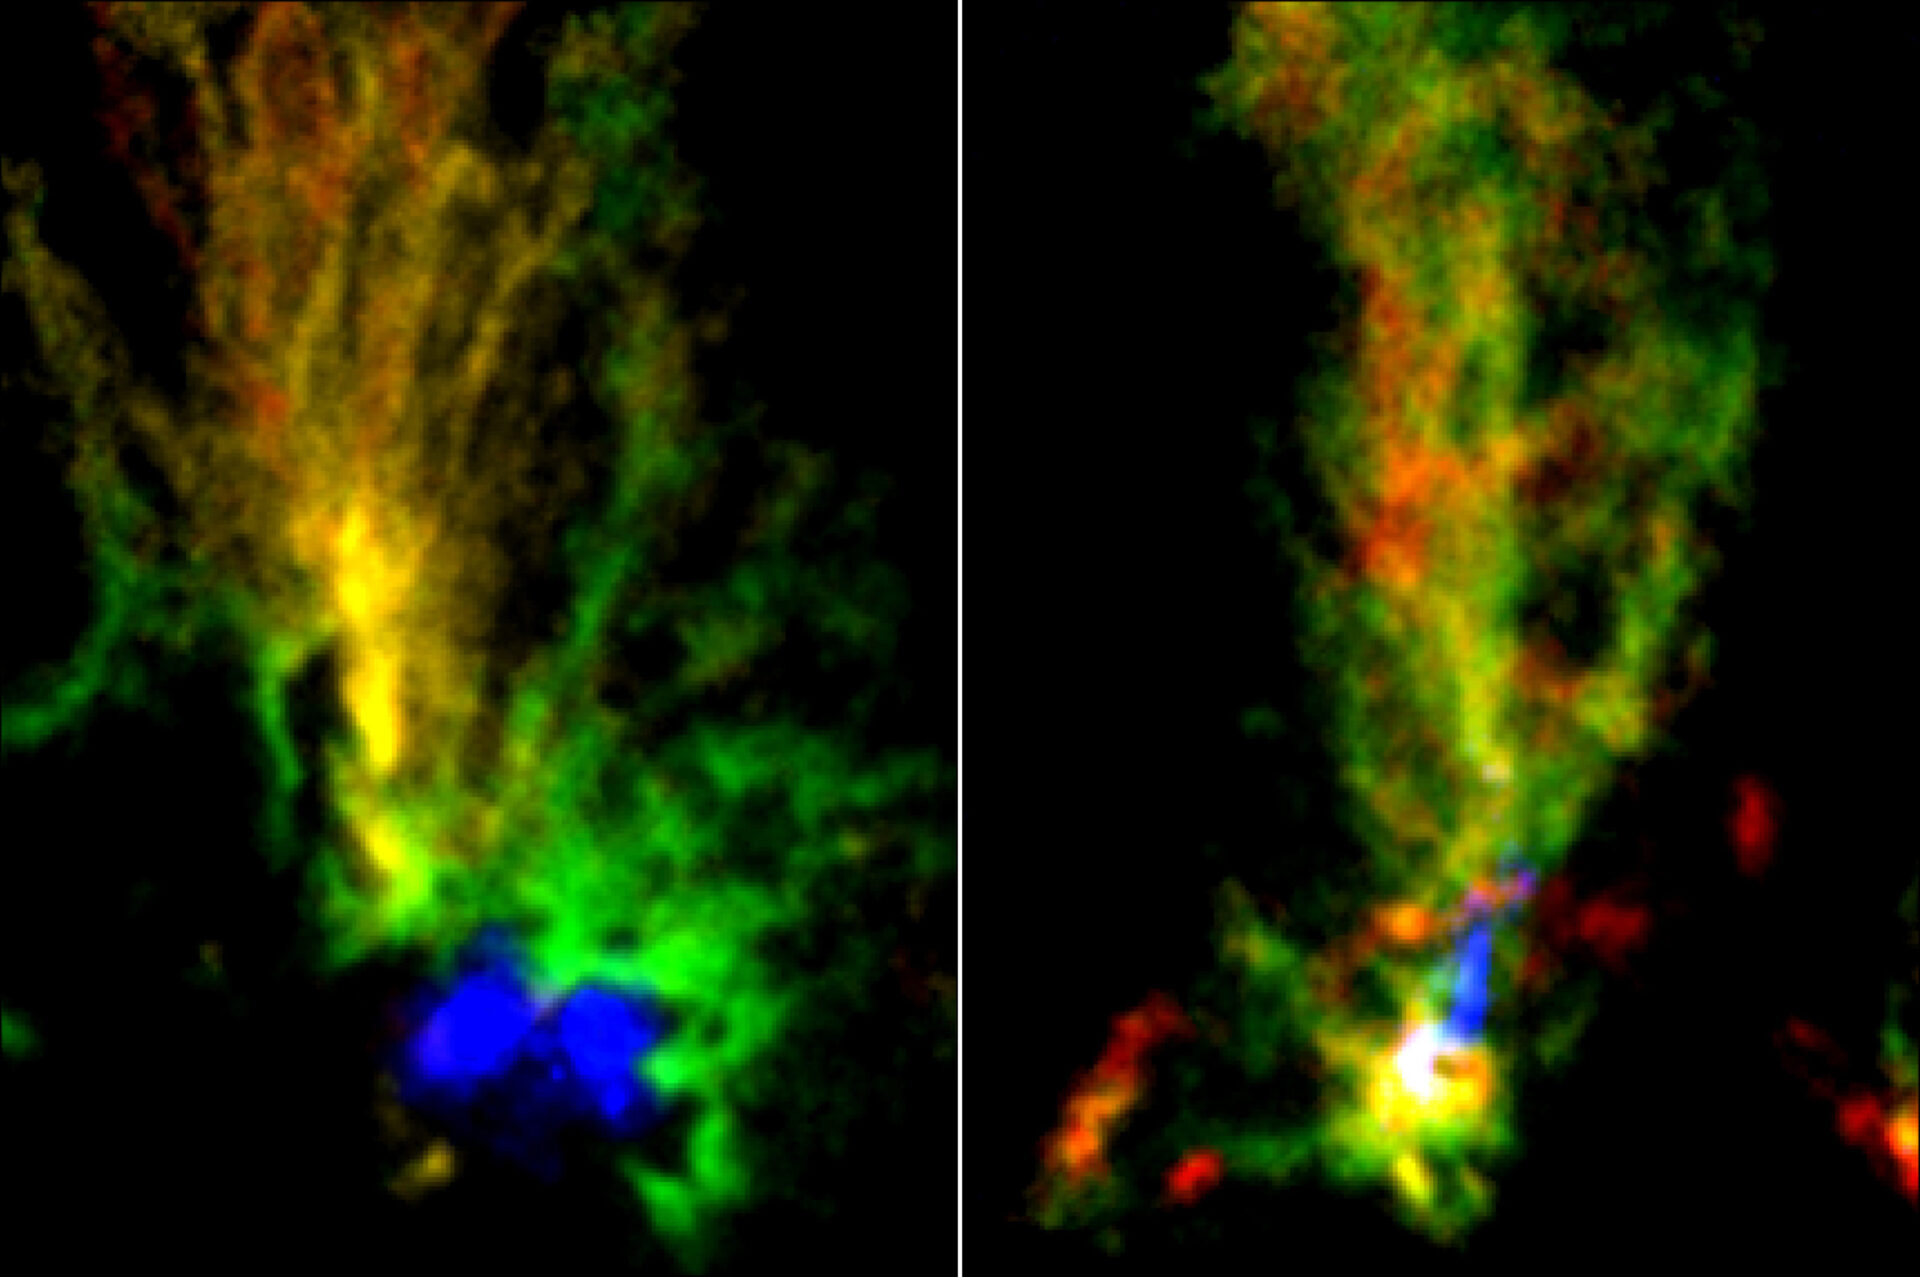 <p>ALMA images of two molecular clouds N159E-Papillon Nebula (left) and N159W South (right). Red and green show the distribution of molecular gas in different velocities seen in the emission from 13CO. Blue region in N159E-Papillon Nebula shows the ionized hydrogen gas observed with the Hubble Space Telescope. Blue part in N159W South shows the emission from dust particles obtained with ALMA. Credit: ALMA (ESO/NAOJ/NRAO)/Fukui et al./Tokuda et al./NASA-ESA Hubble Space Telescope</p>
